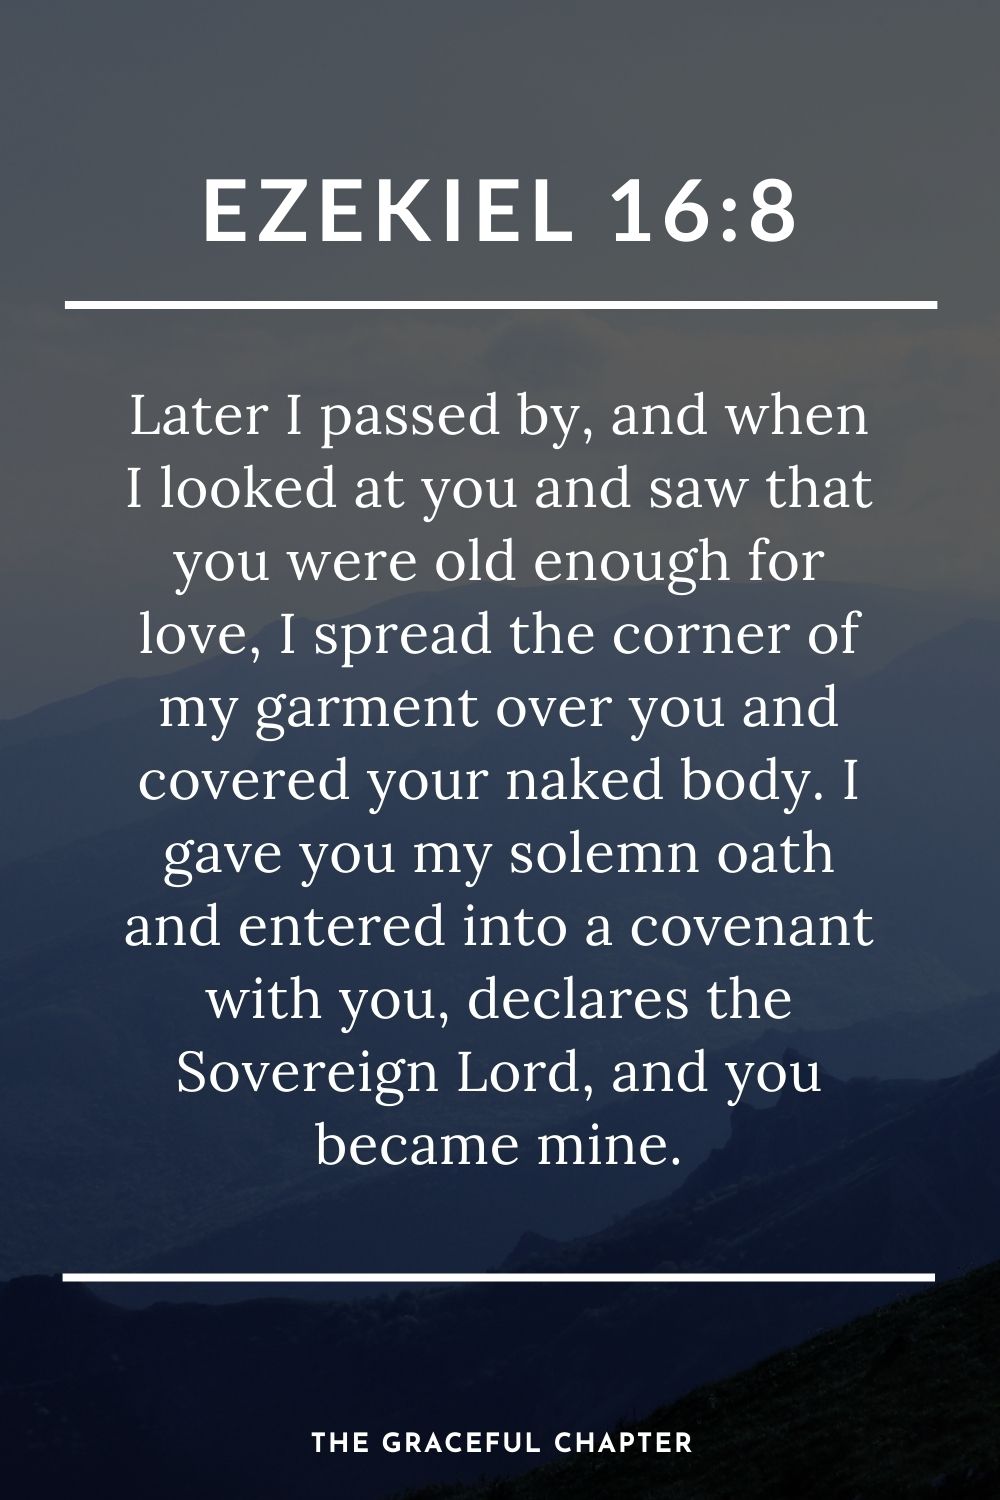 Later I passed by, and when I looked at you and saw that you were old enough for love, I spread the corner of my garment over you and covered your naked body. I gave you my solemn oath and entered into a covenant with you, declares the Sovereign Lord, and you became mine. Ezekiel 16:8